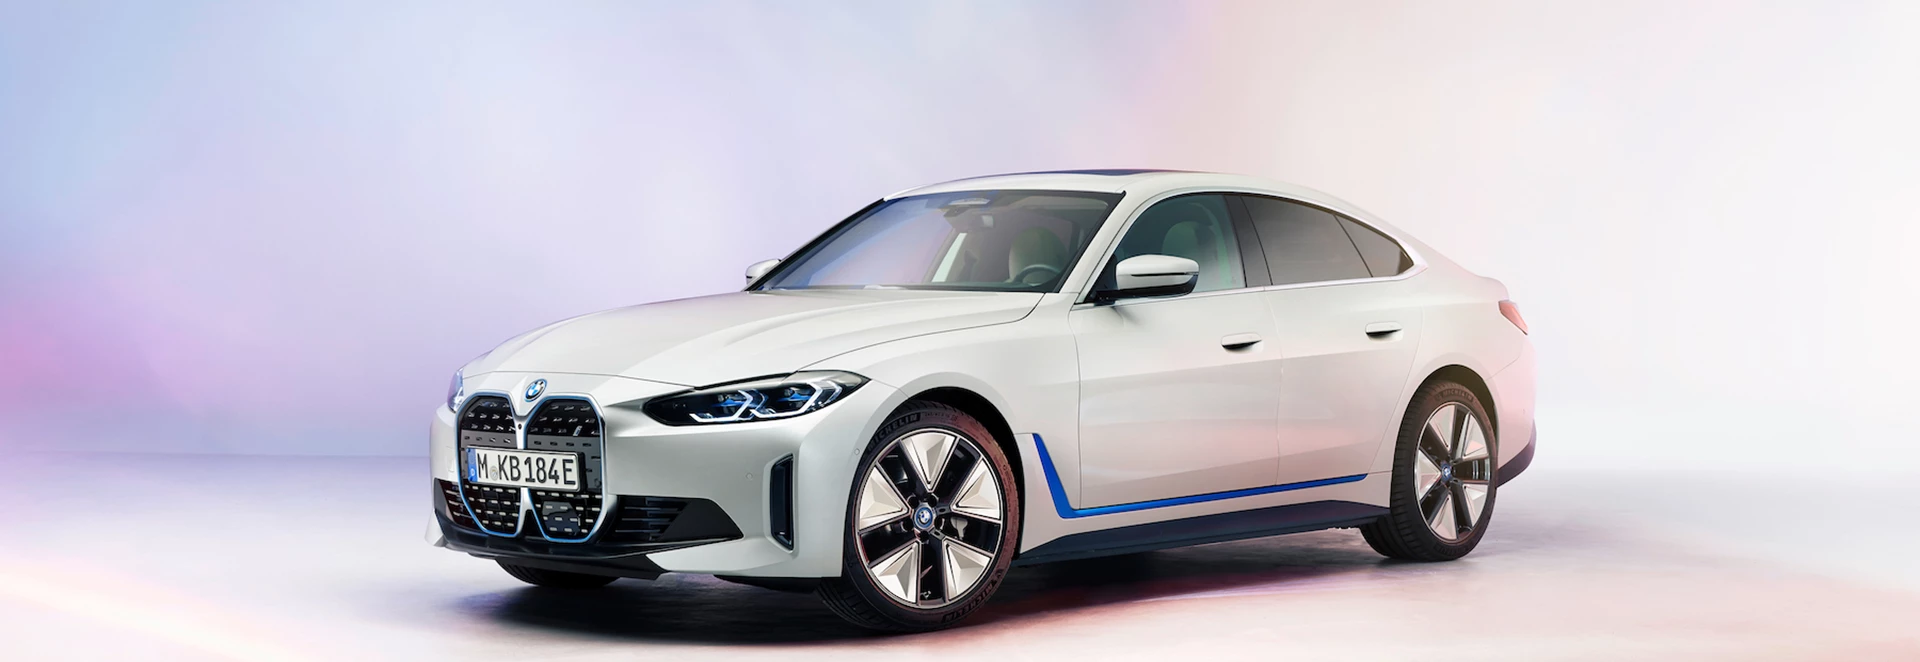 BMW i4 EV unveiled in production-ready form 